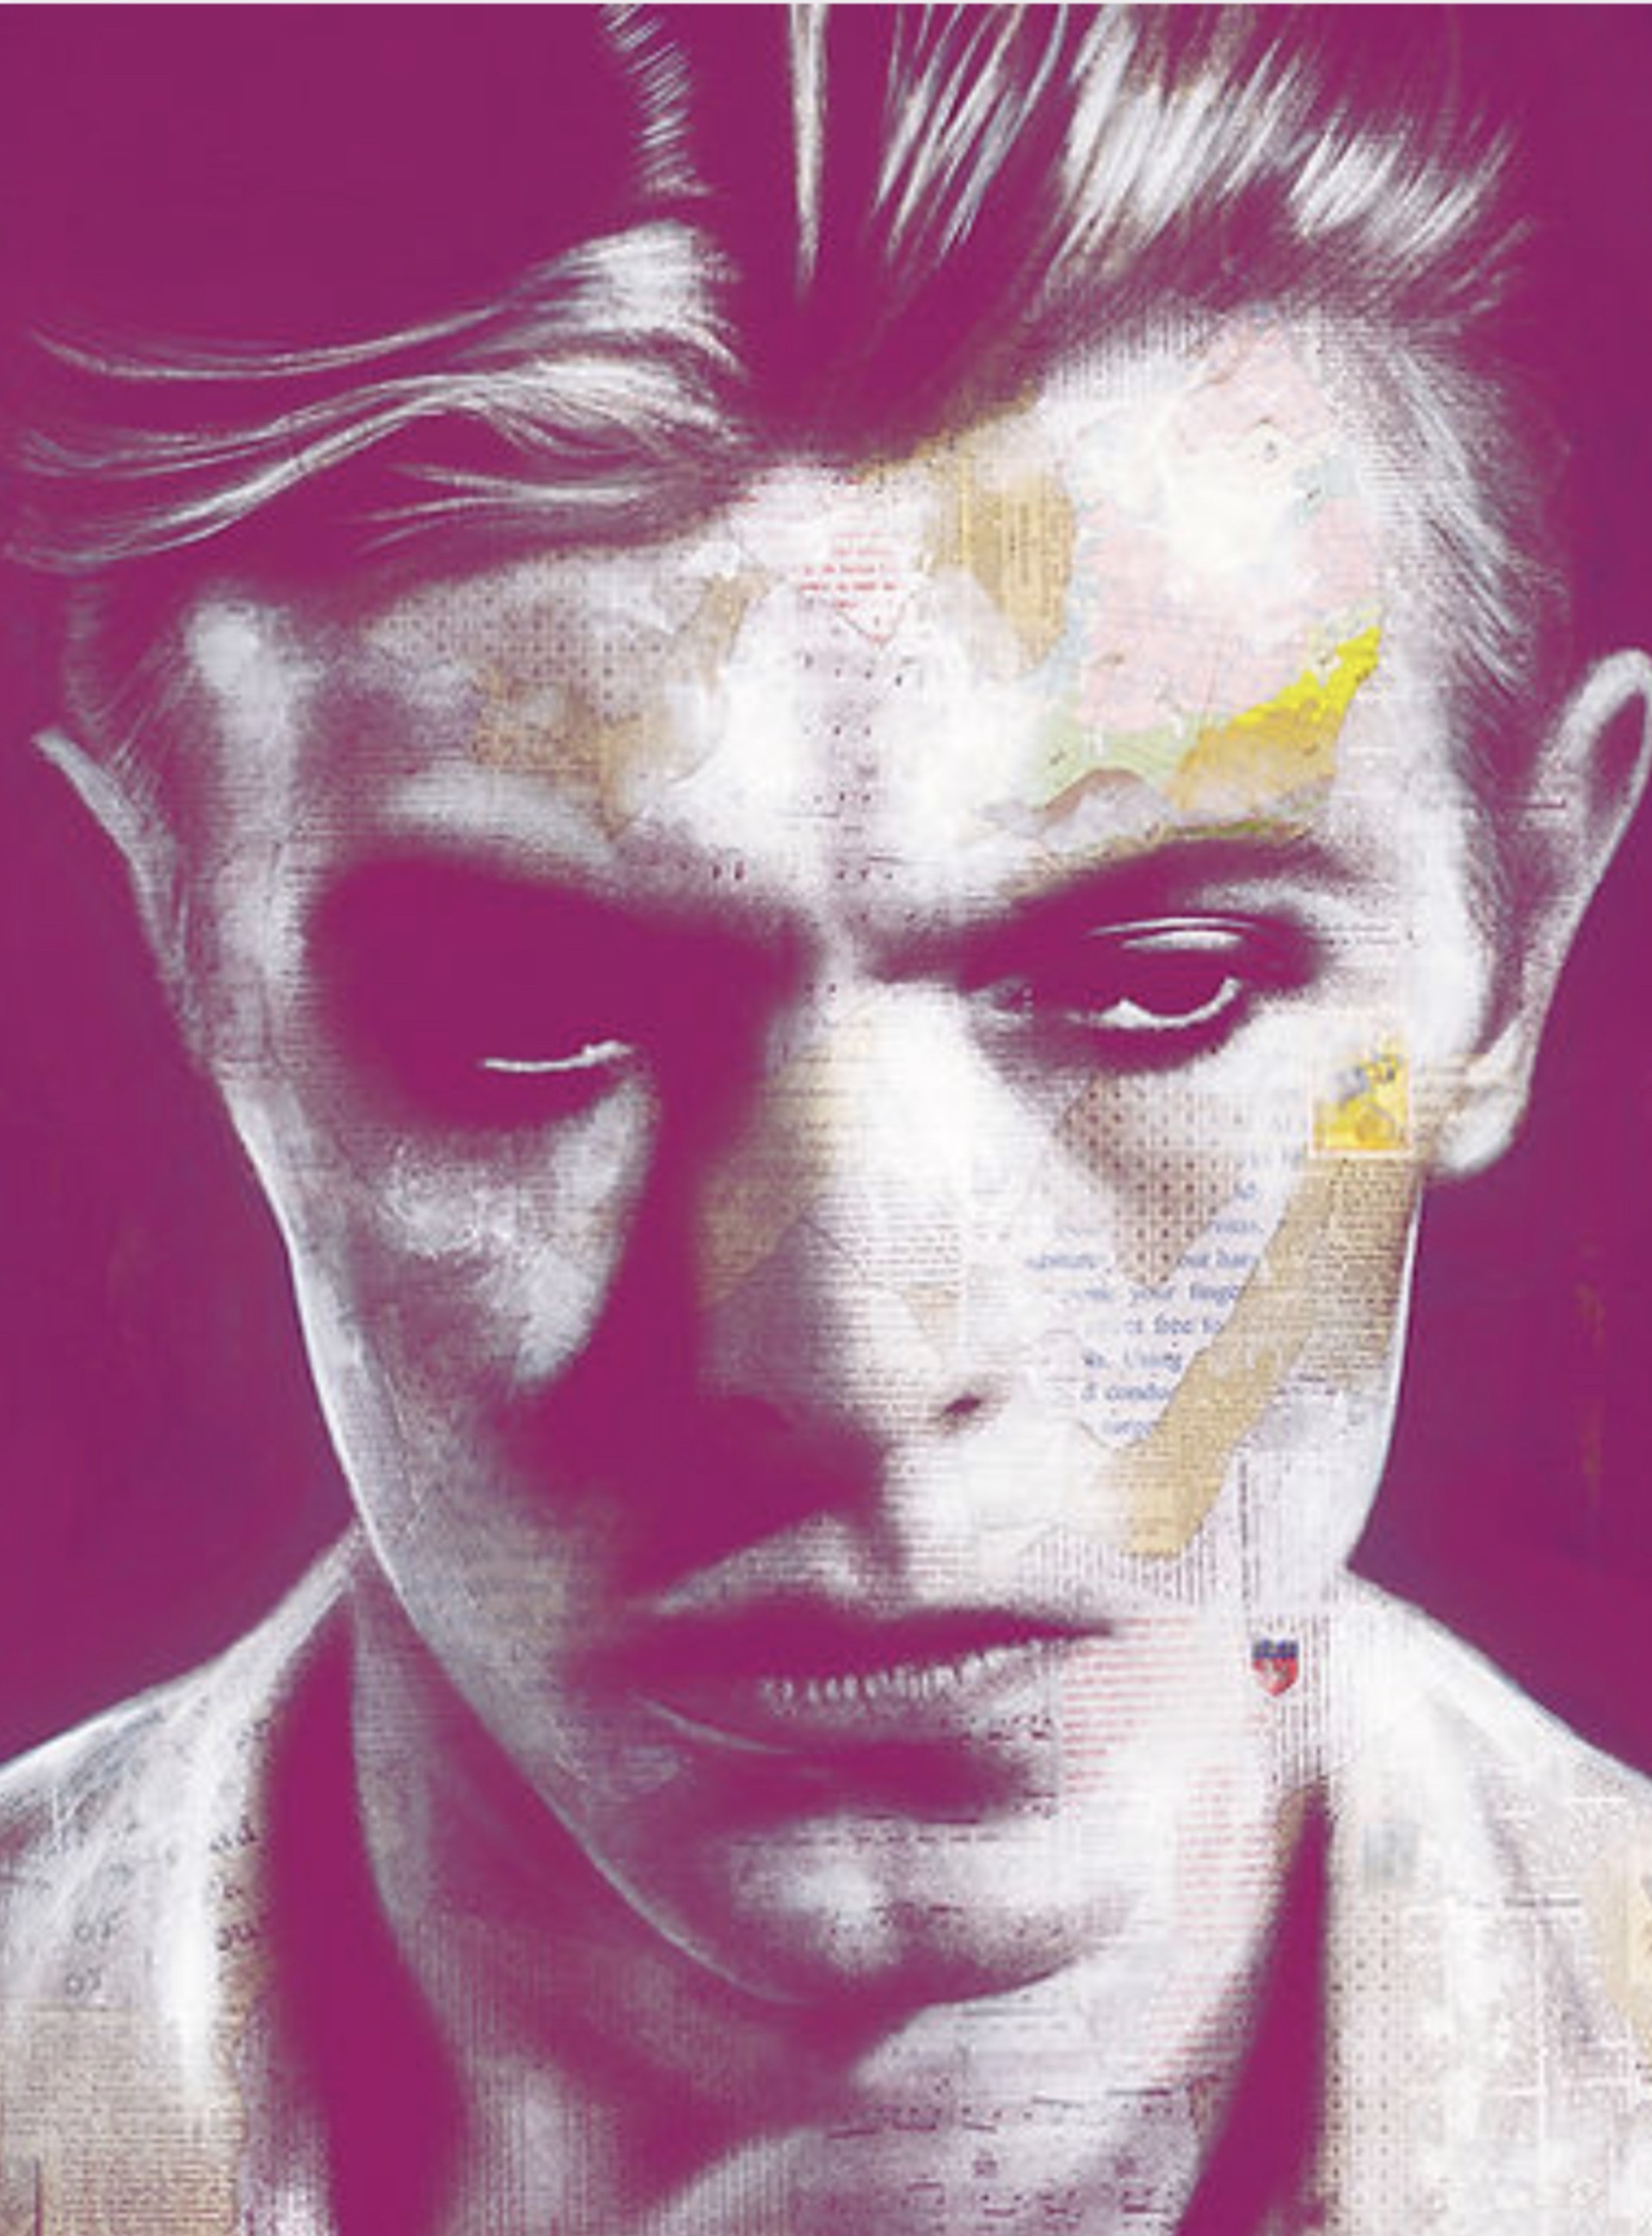 Bowie-Edition of 15 -Similar Painted Originals can be Commissioned by Andre Monet